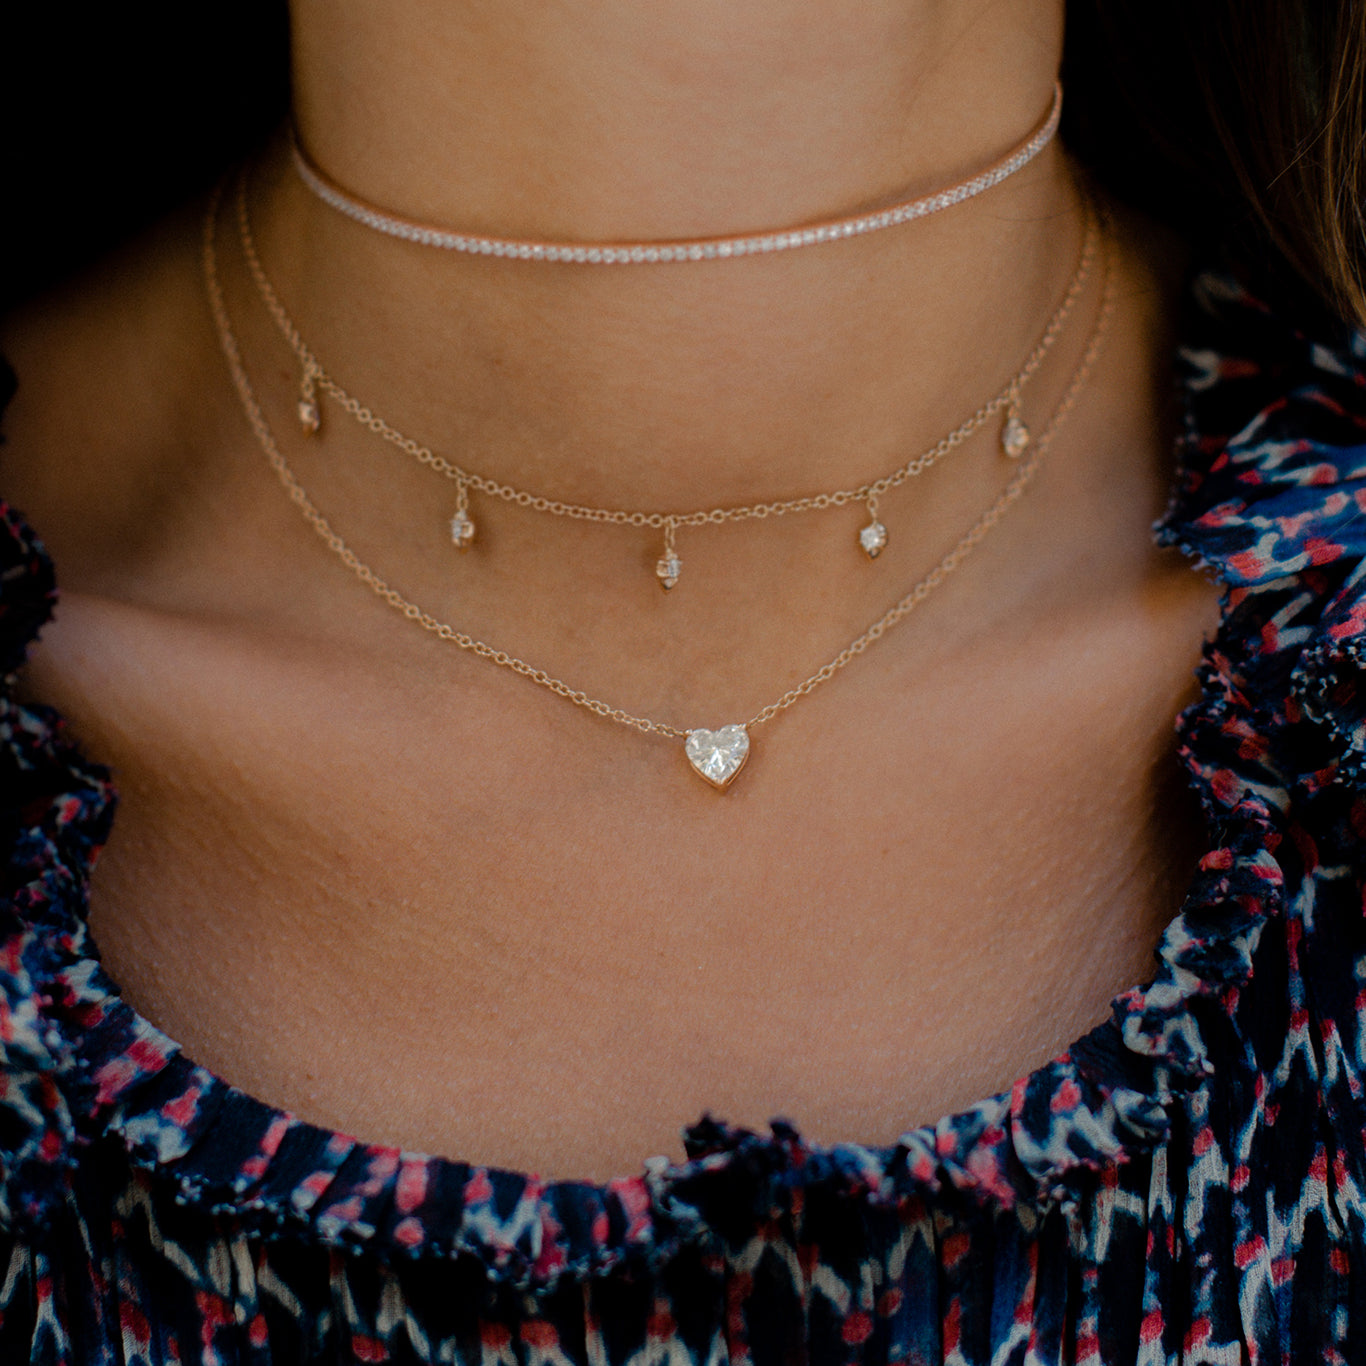 Our Floating Heart Necklace shown layered with our Lily Choker and Infinity Choker.